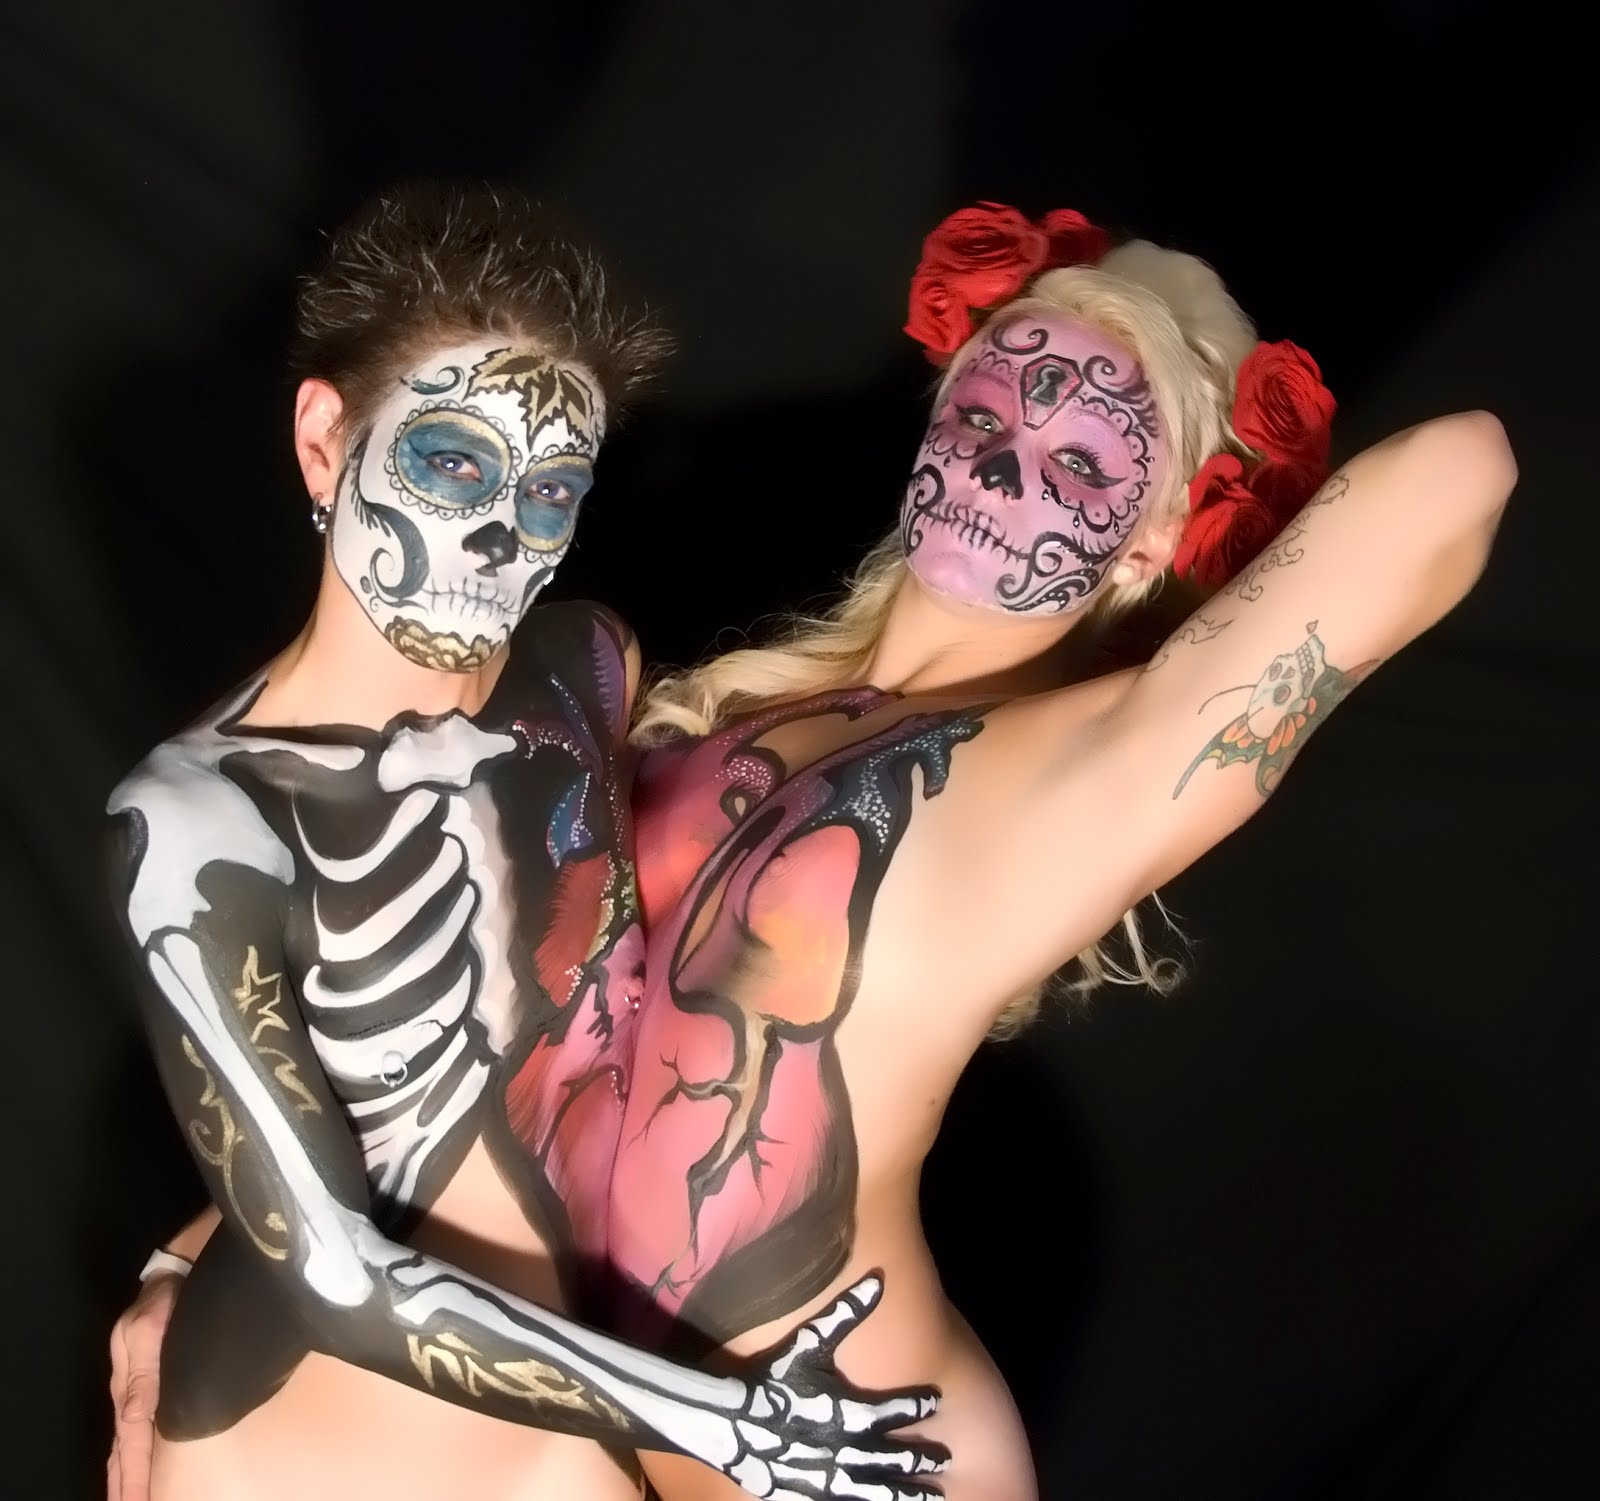 Day of the dead nudes - Quality porn